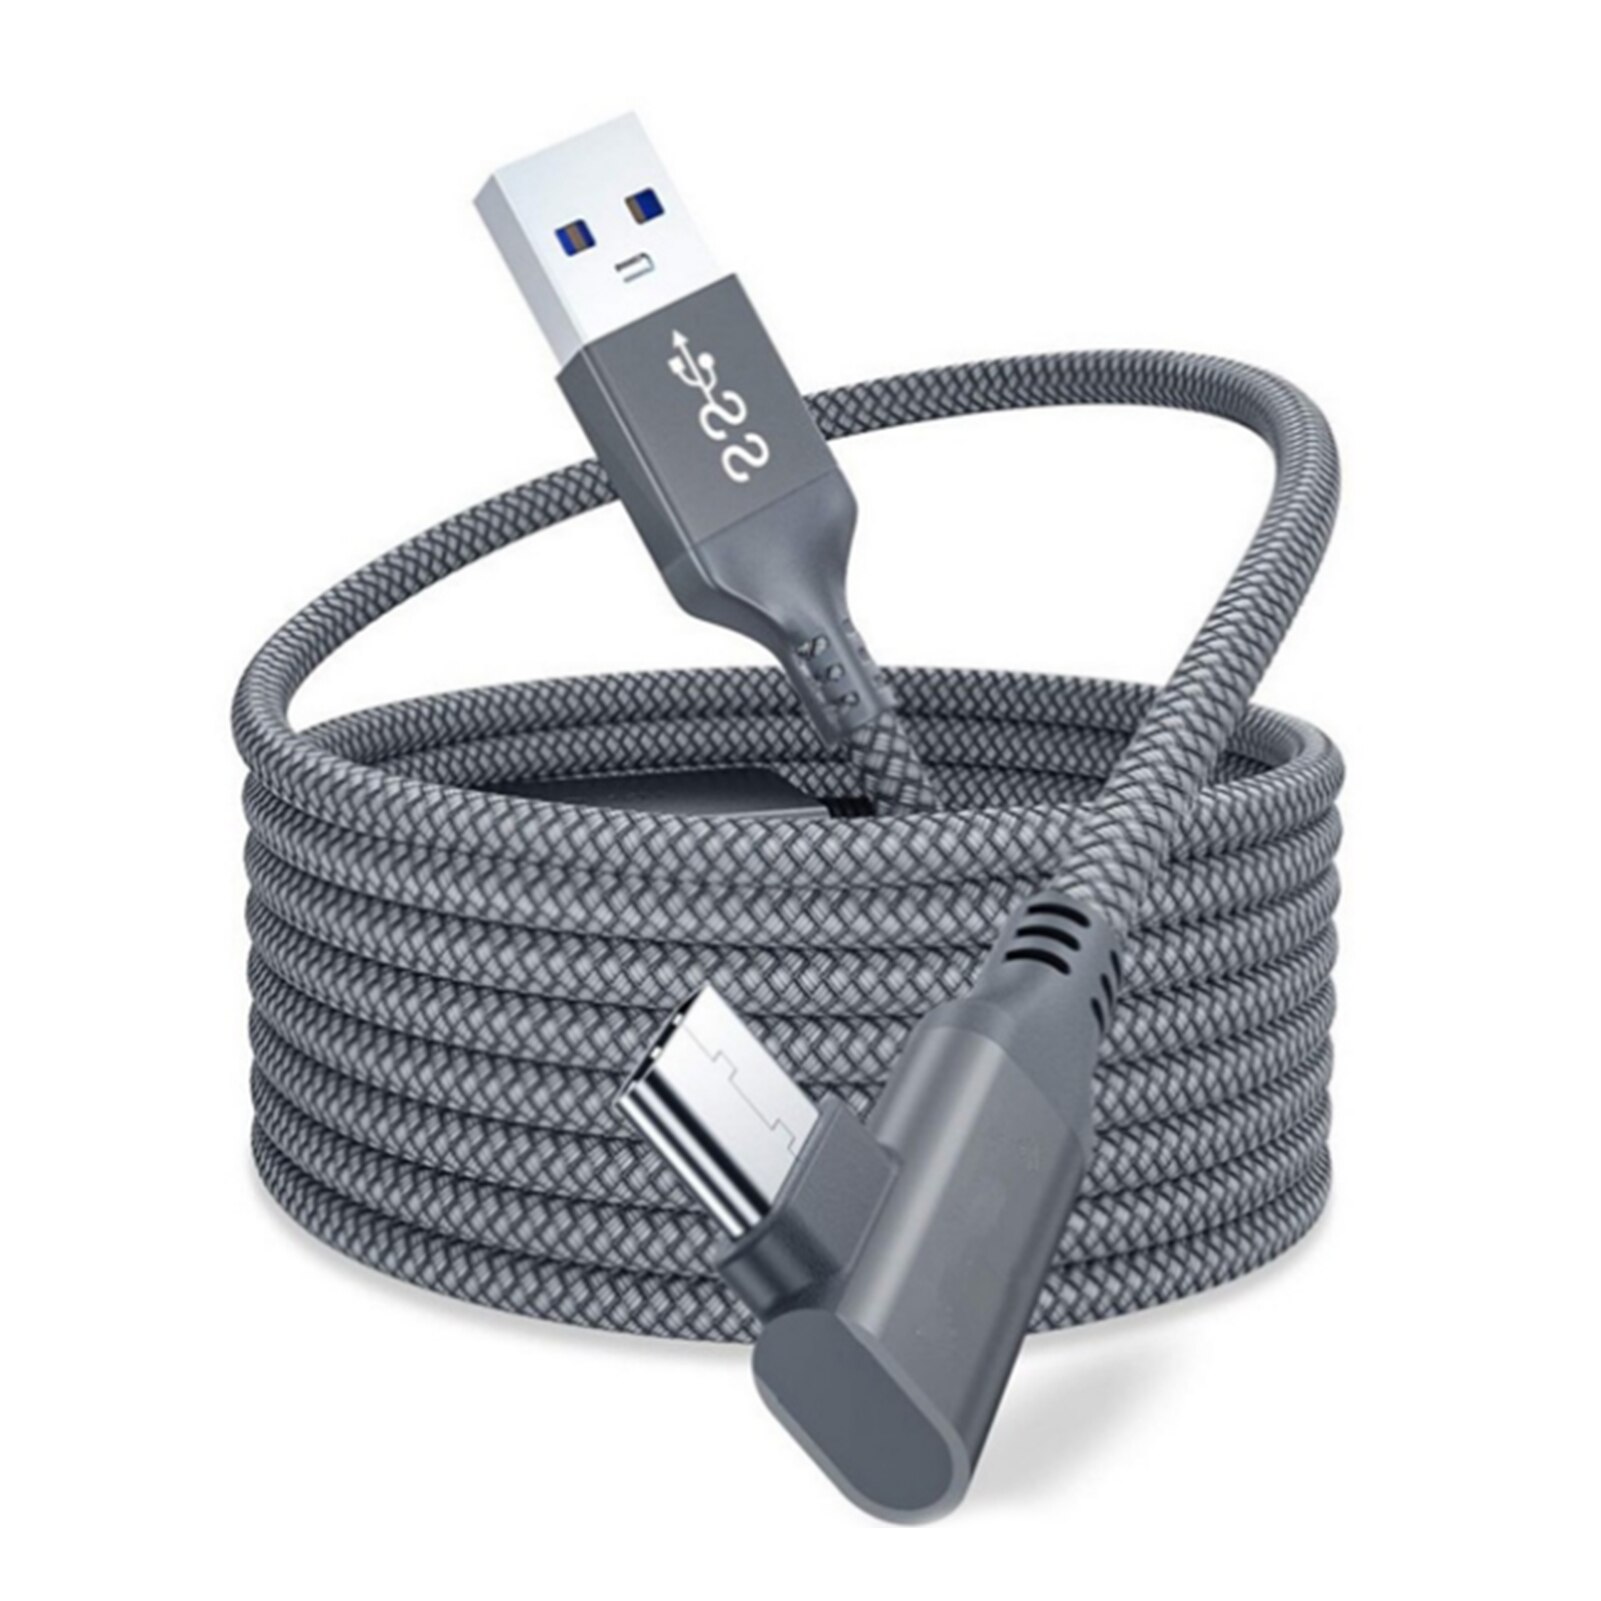 5M Oplaadkabel Data Line Voor Oculus Quest 1 2 Link Vr Headset Usb 3.0 Type C Data Transfer type C Te USB-A Cord Vr Accessoires